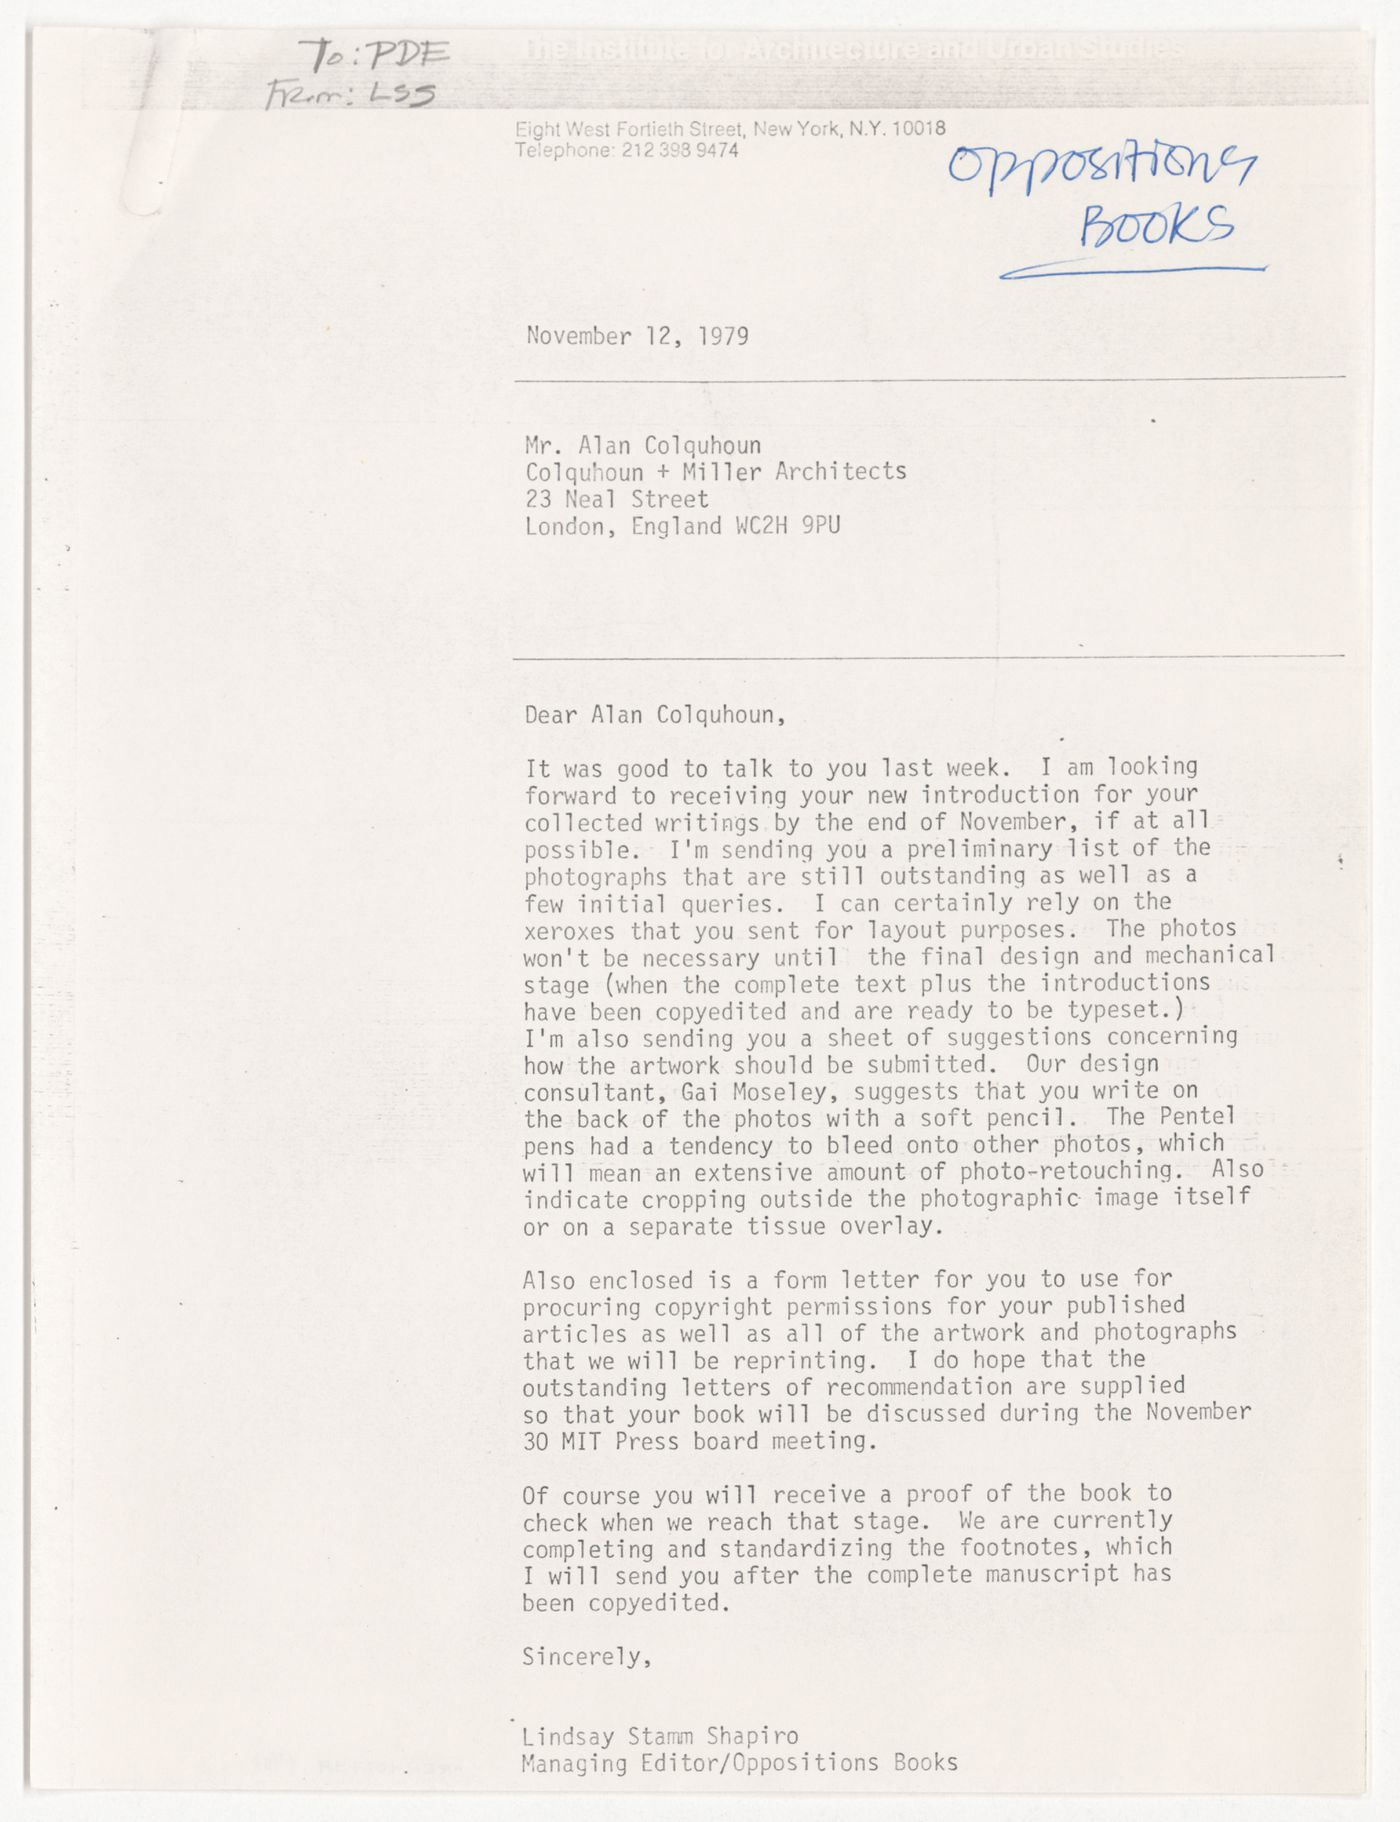 Letter from Lindsay Stamm Shapiro to Alan Colquhoun about Colquhoun's collected writings with attachments